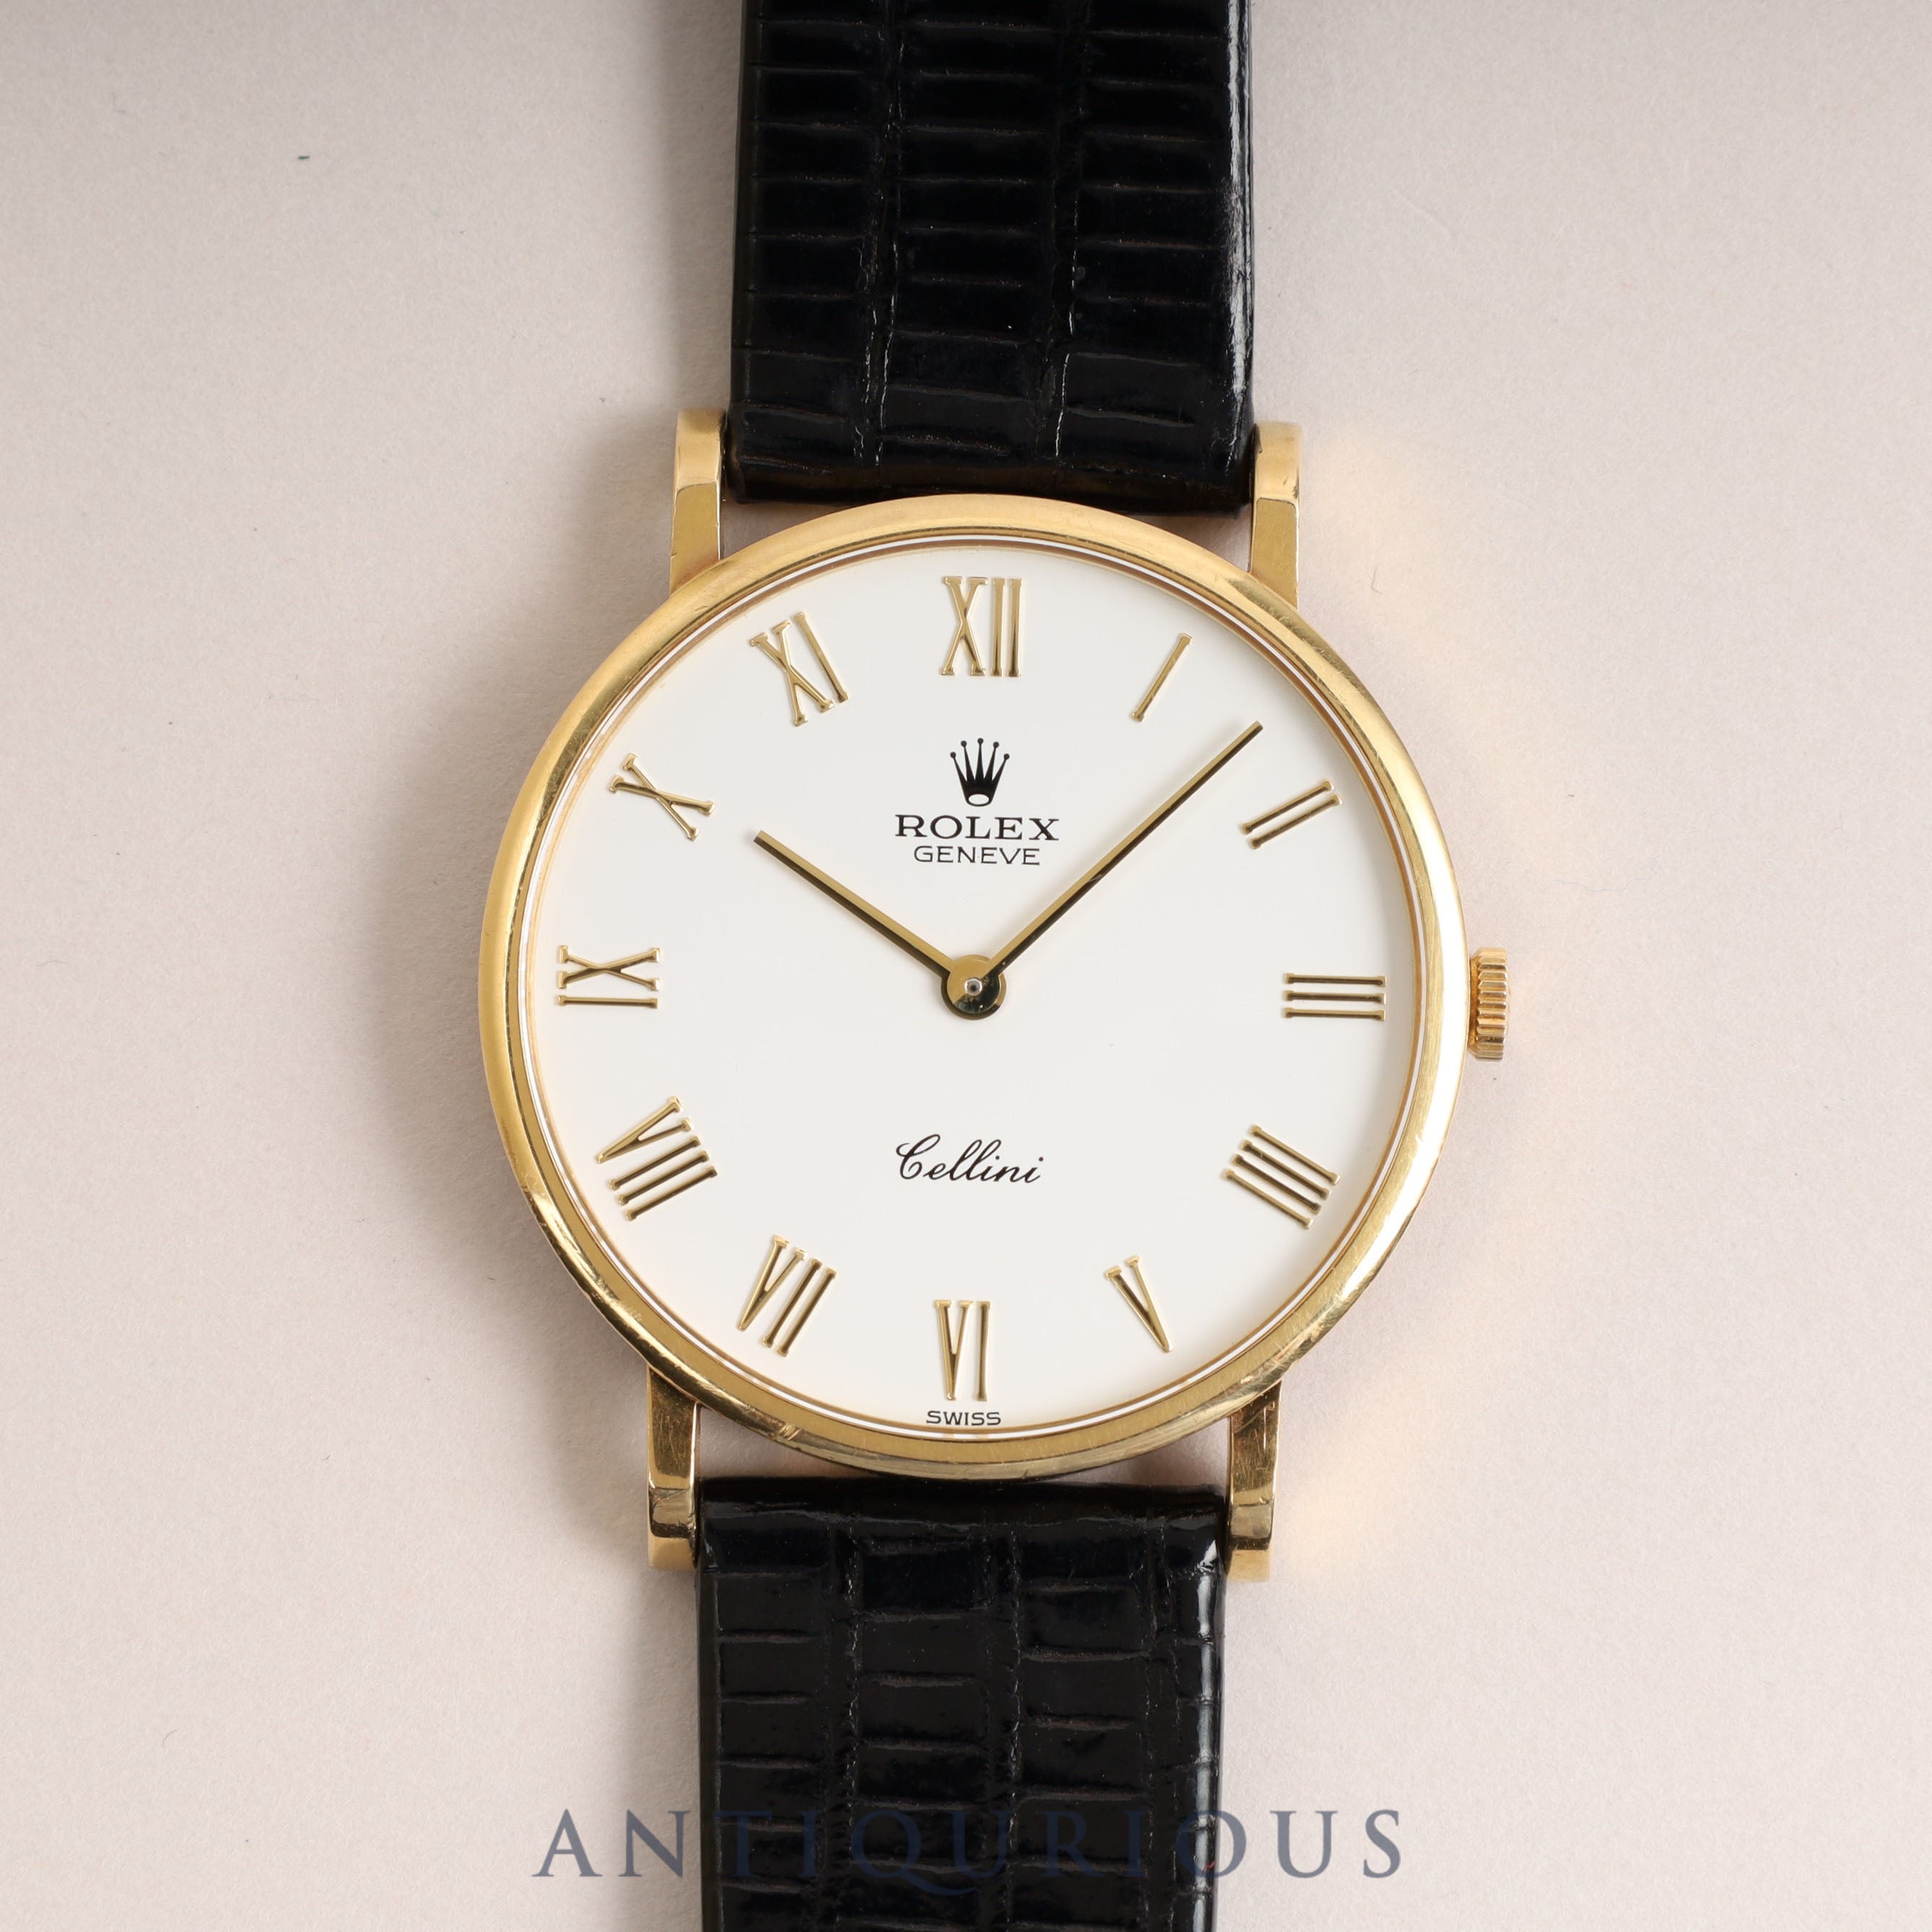 ROLEX CELLINI 5112 Manual winding Cal.1601 YG Leather White Dial N number